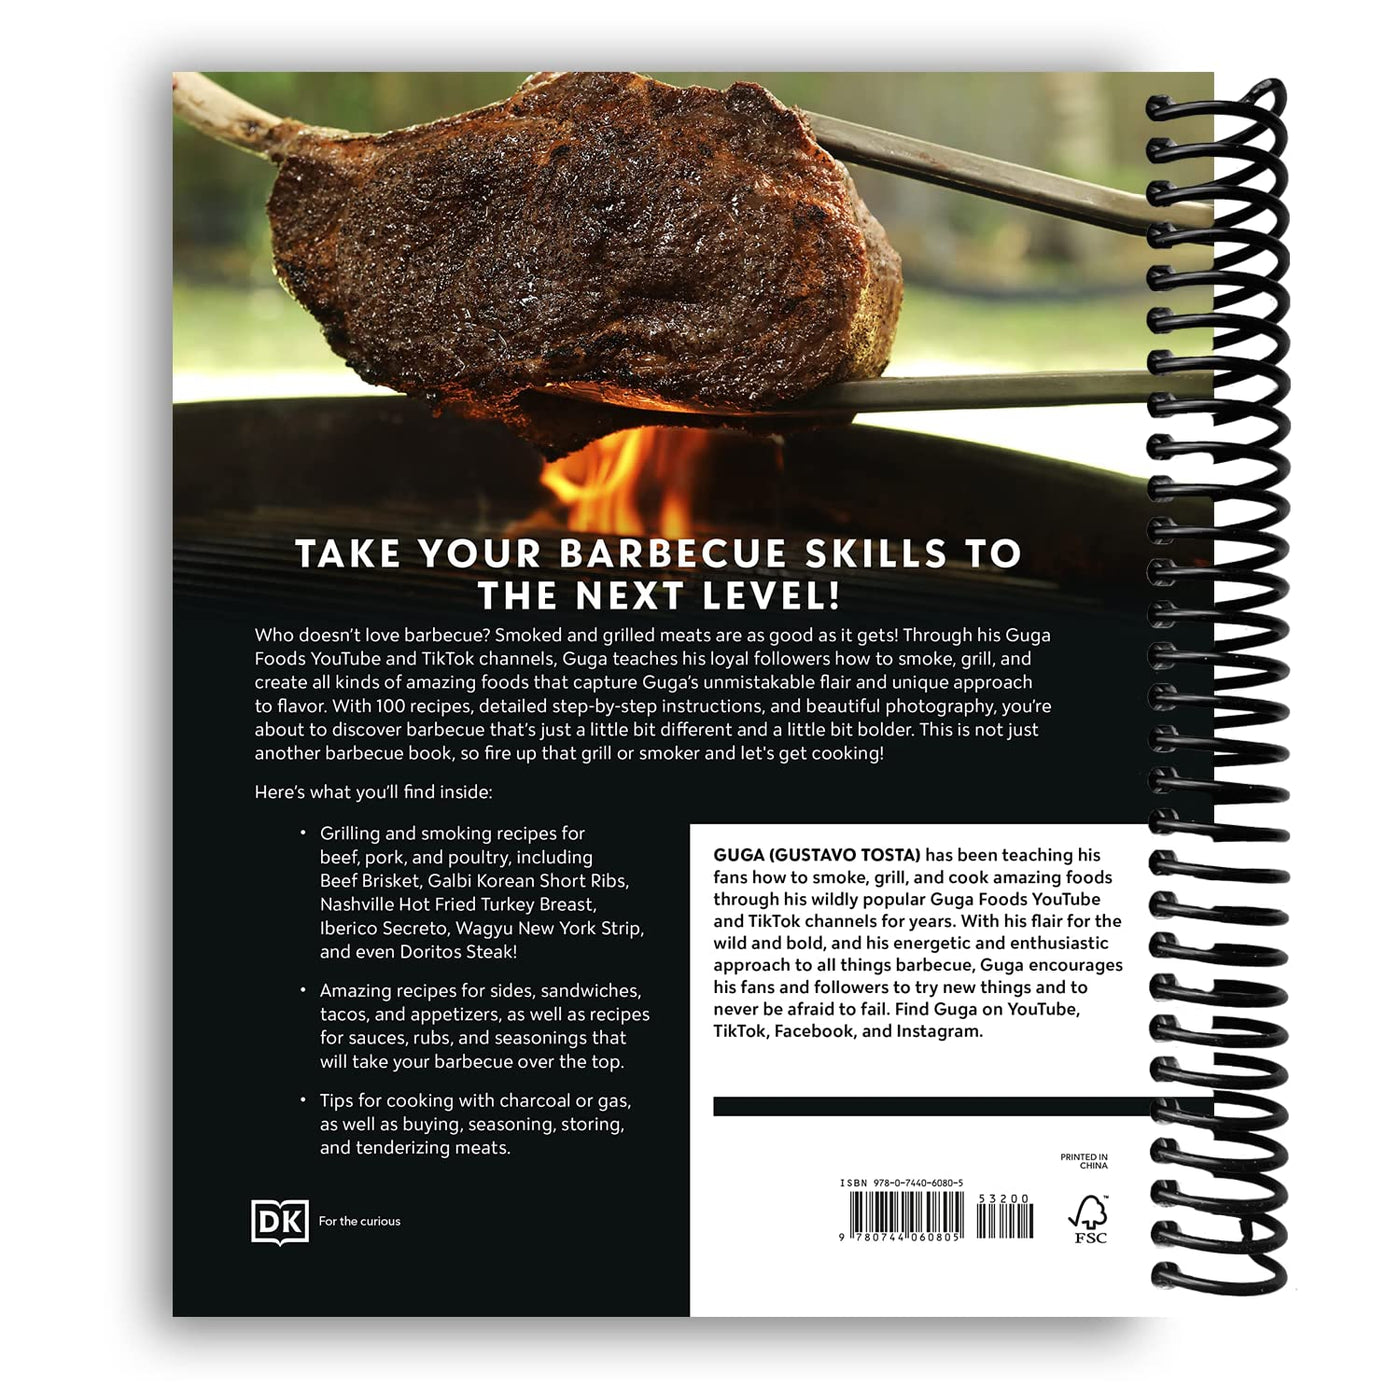 Guga: Breaking the Barbecue Rules (Spiral Bound)